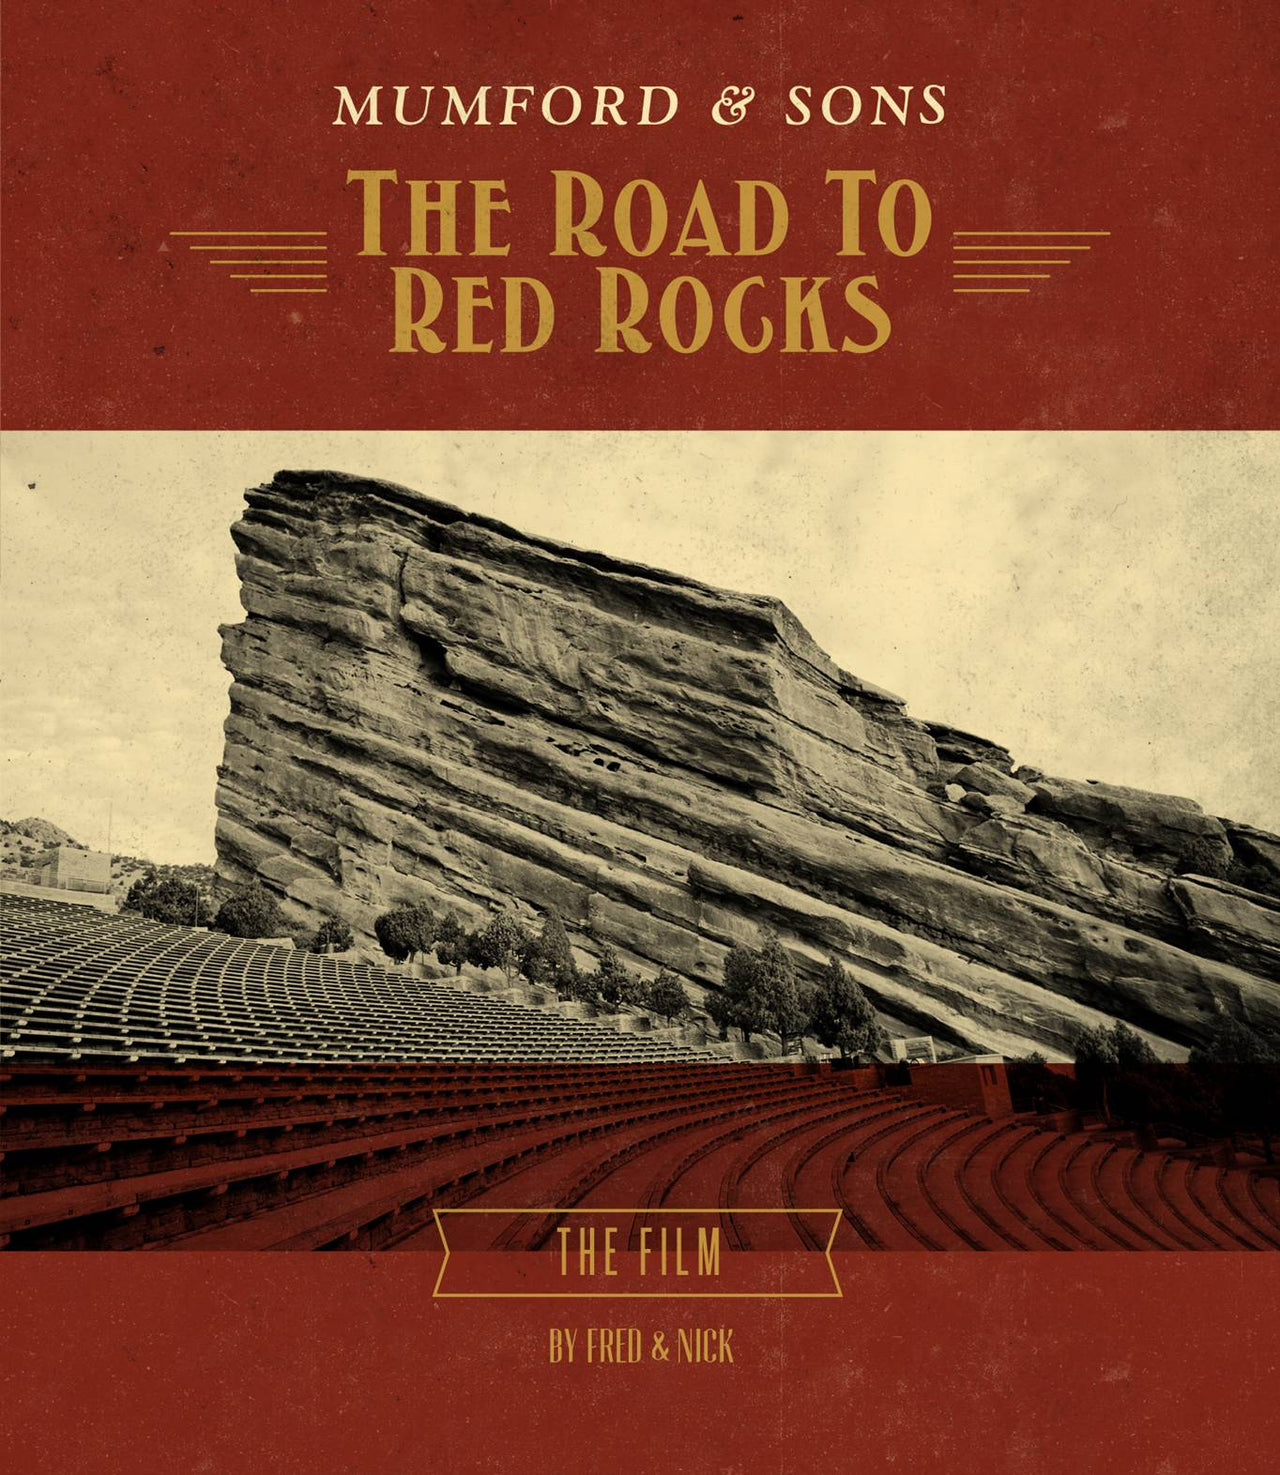 Mumford & Sons: The Road To Red Rocks DVD